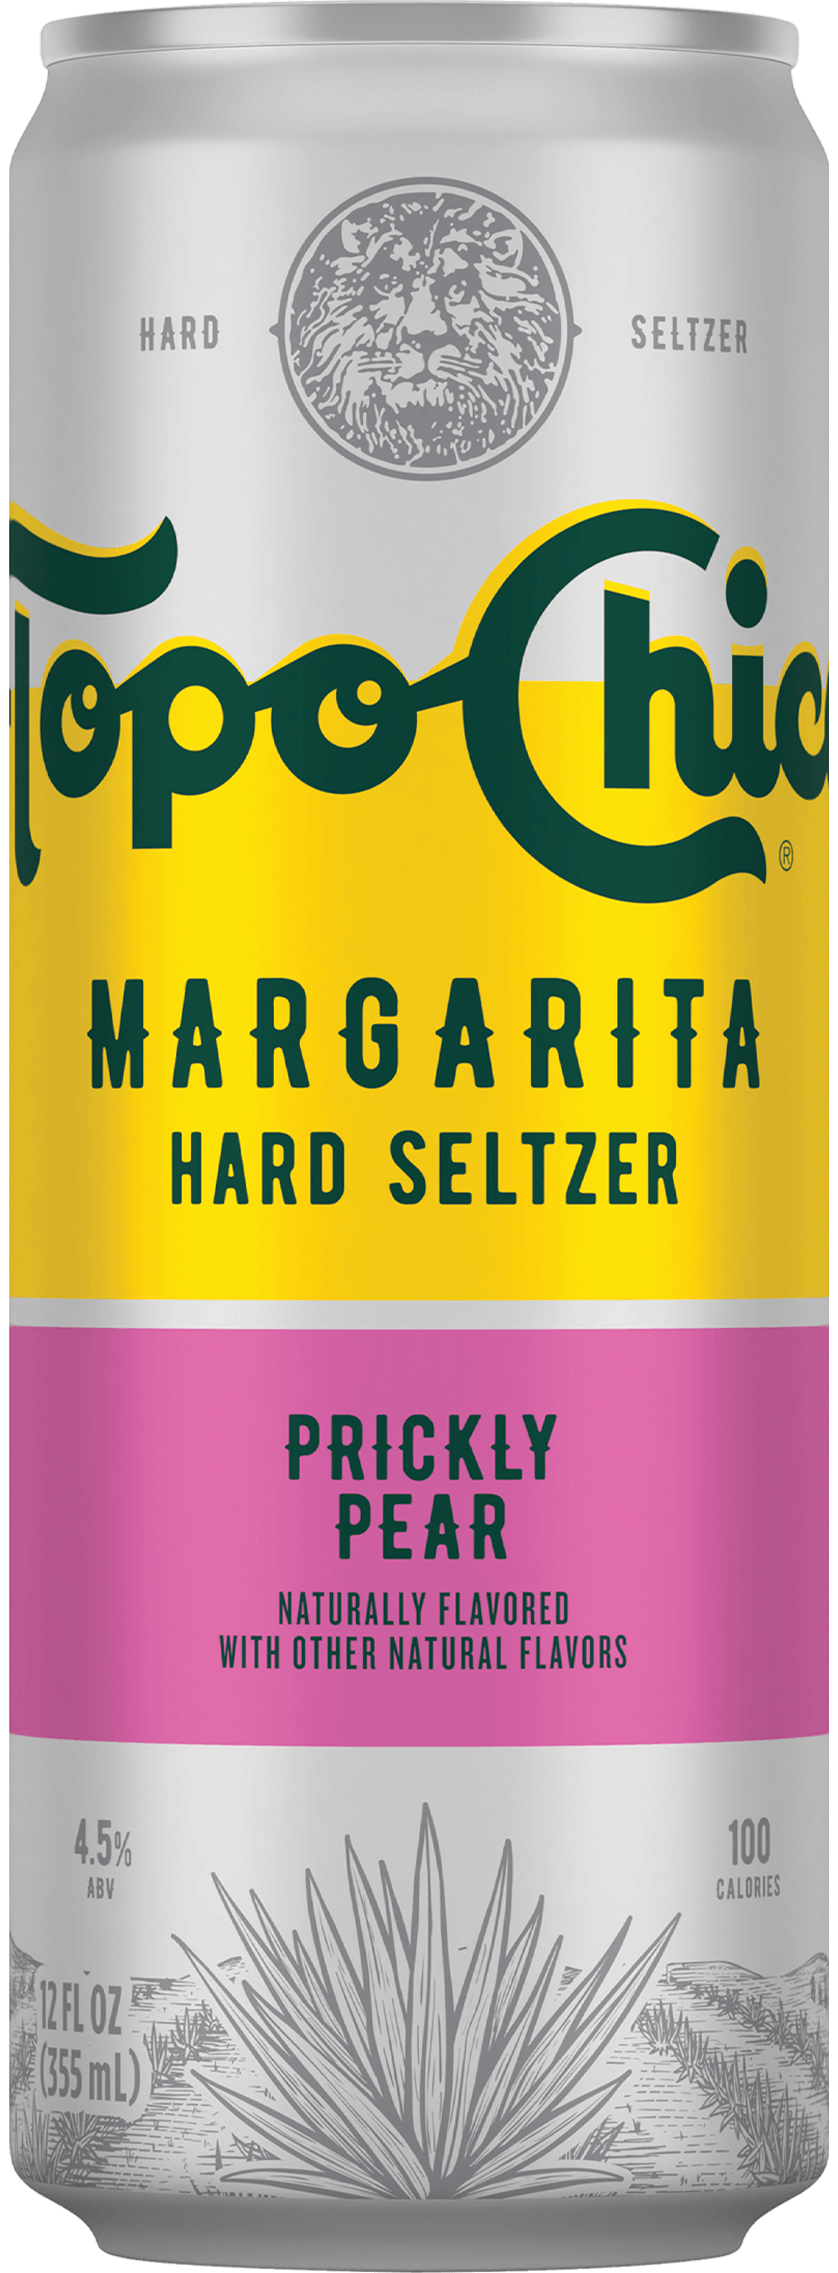 Prickly Pear can